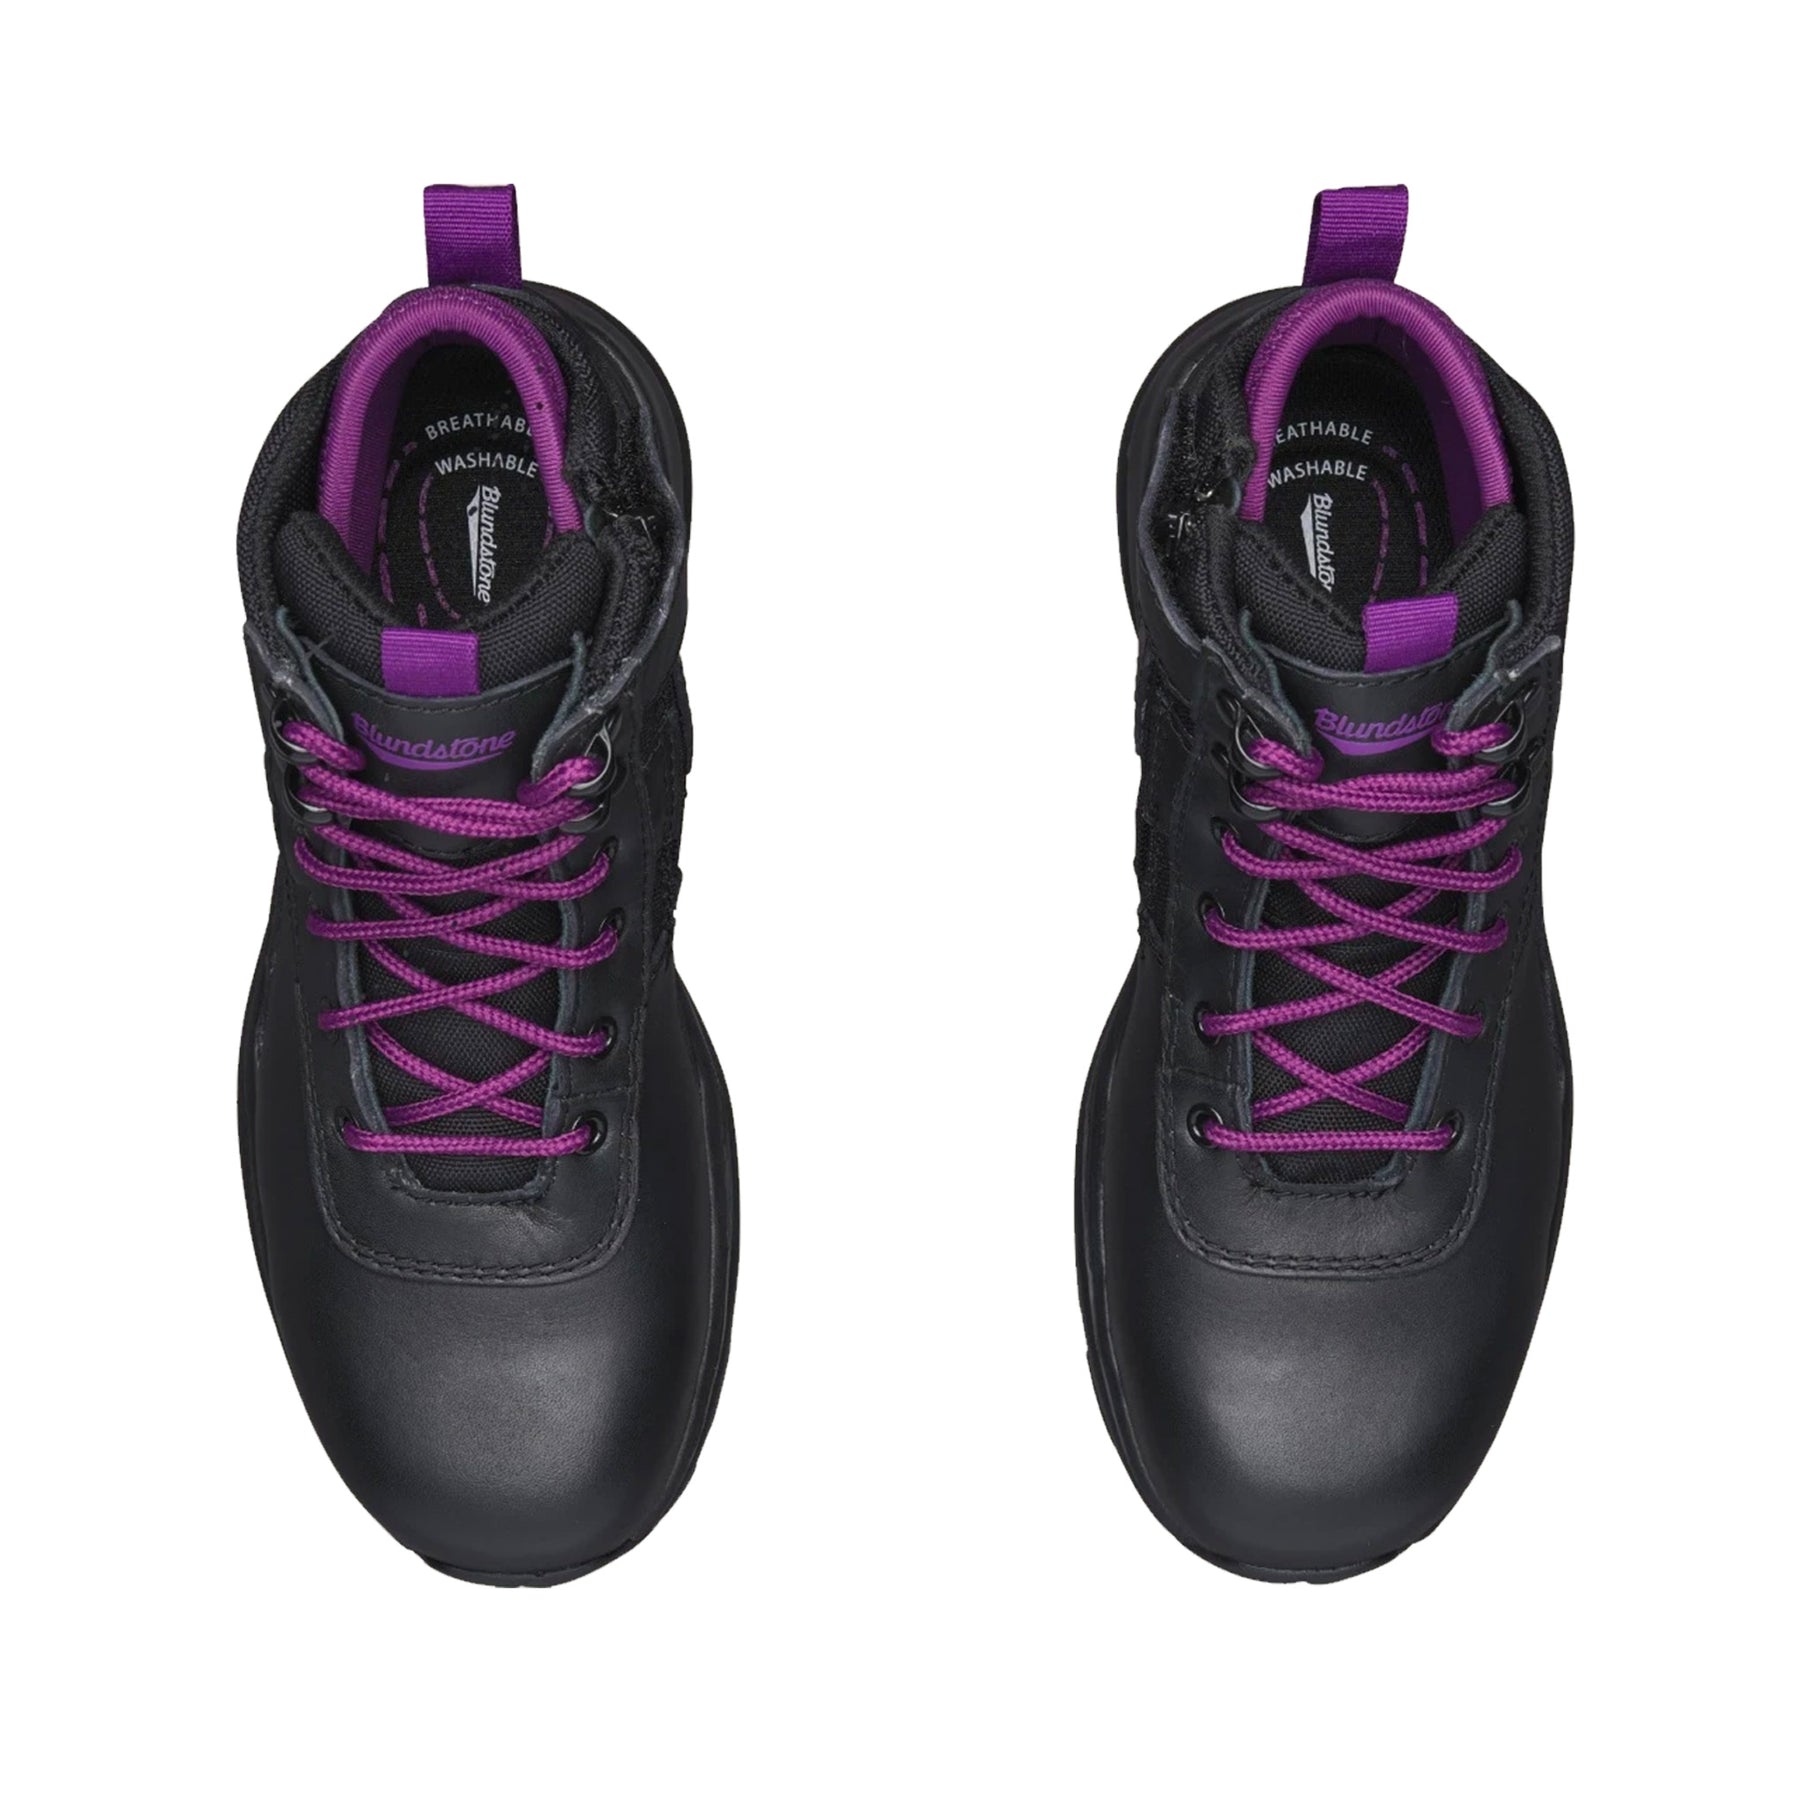 blundstone womens safety jogger in black purple